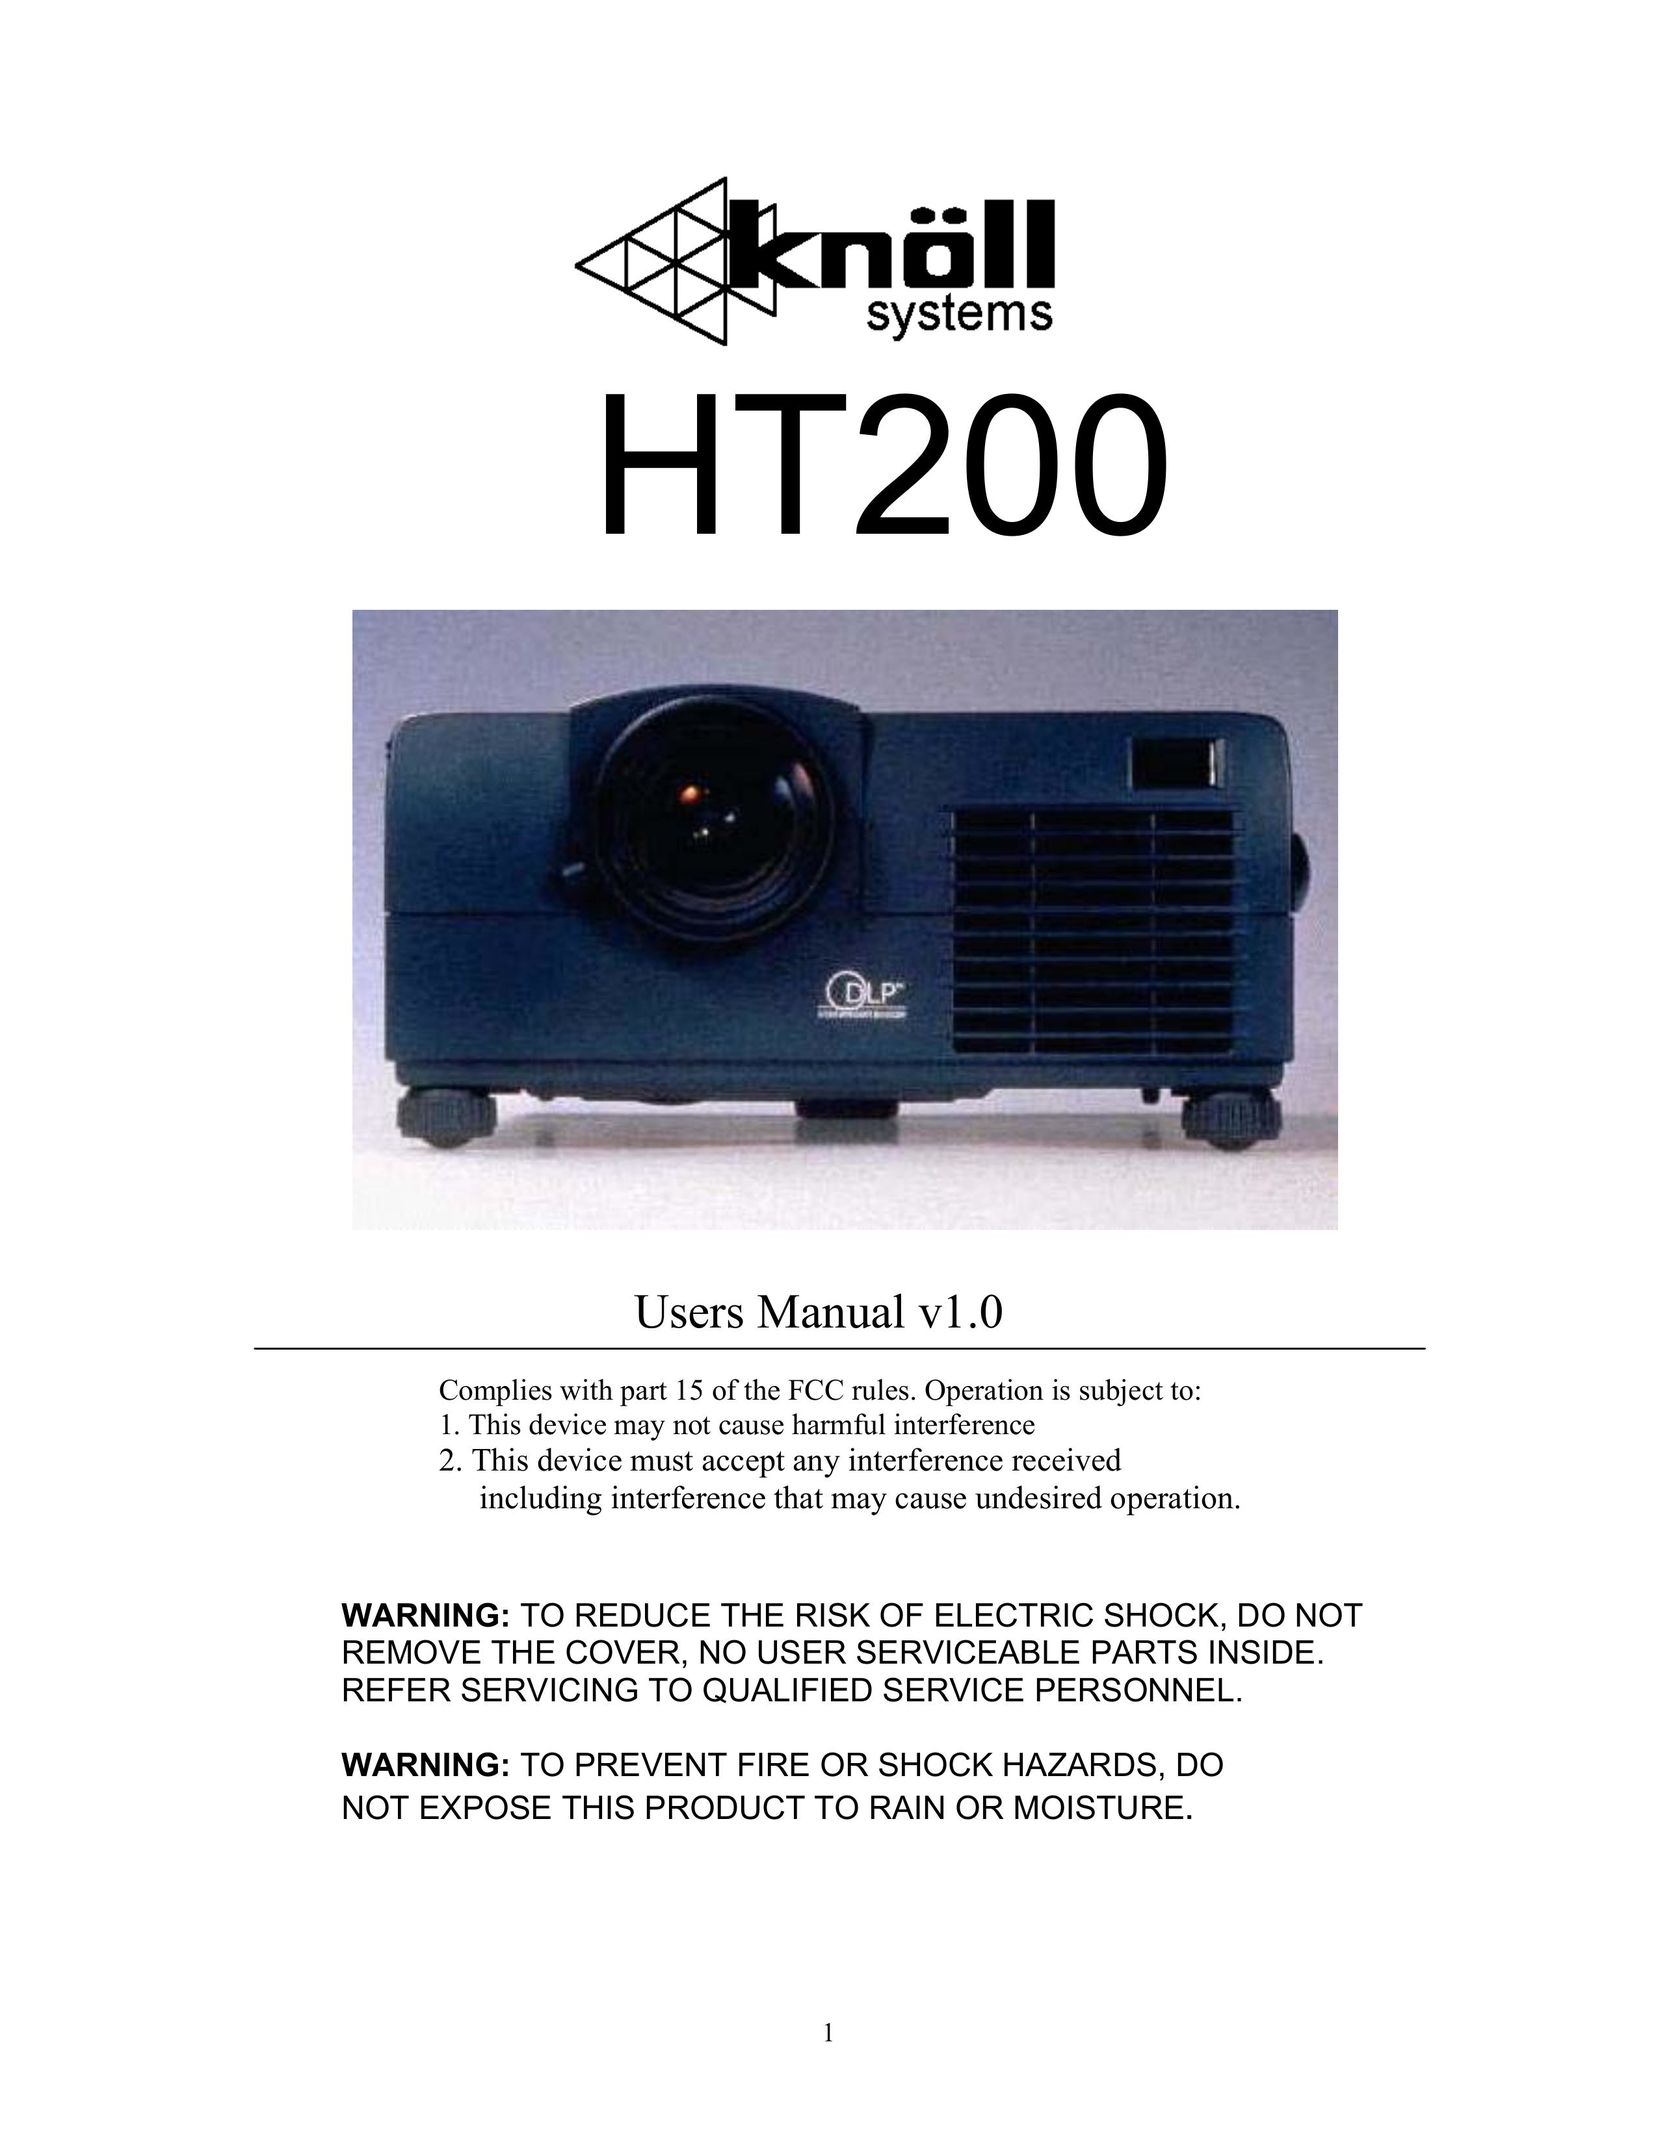 Knoll Systems HT200 Projector User Manual